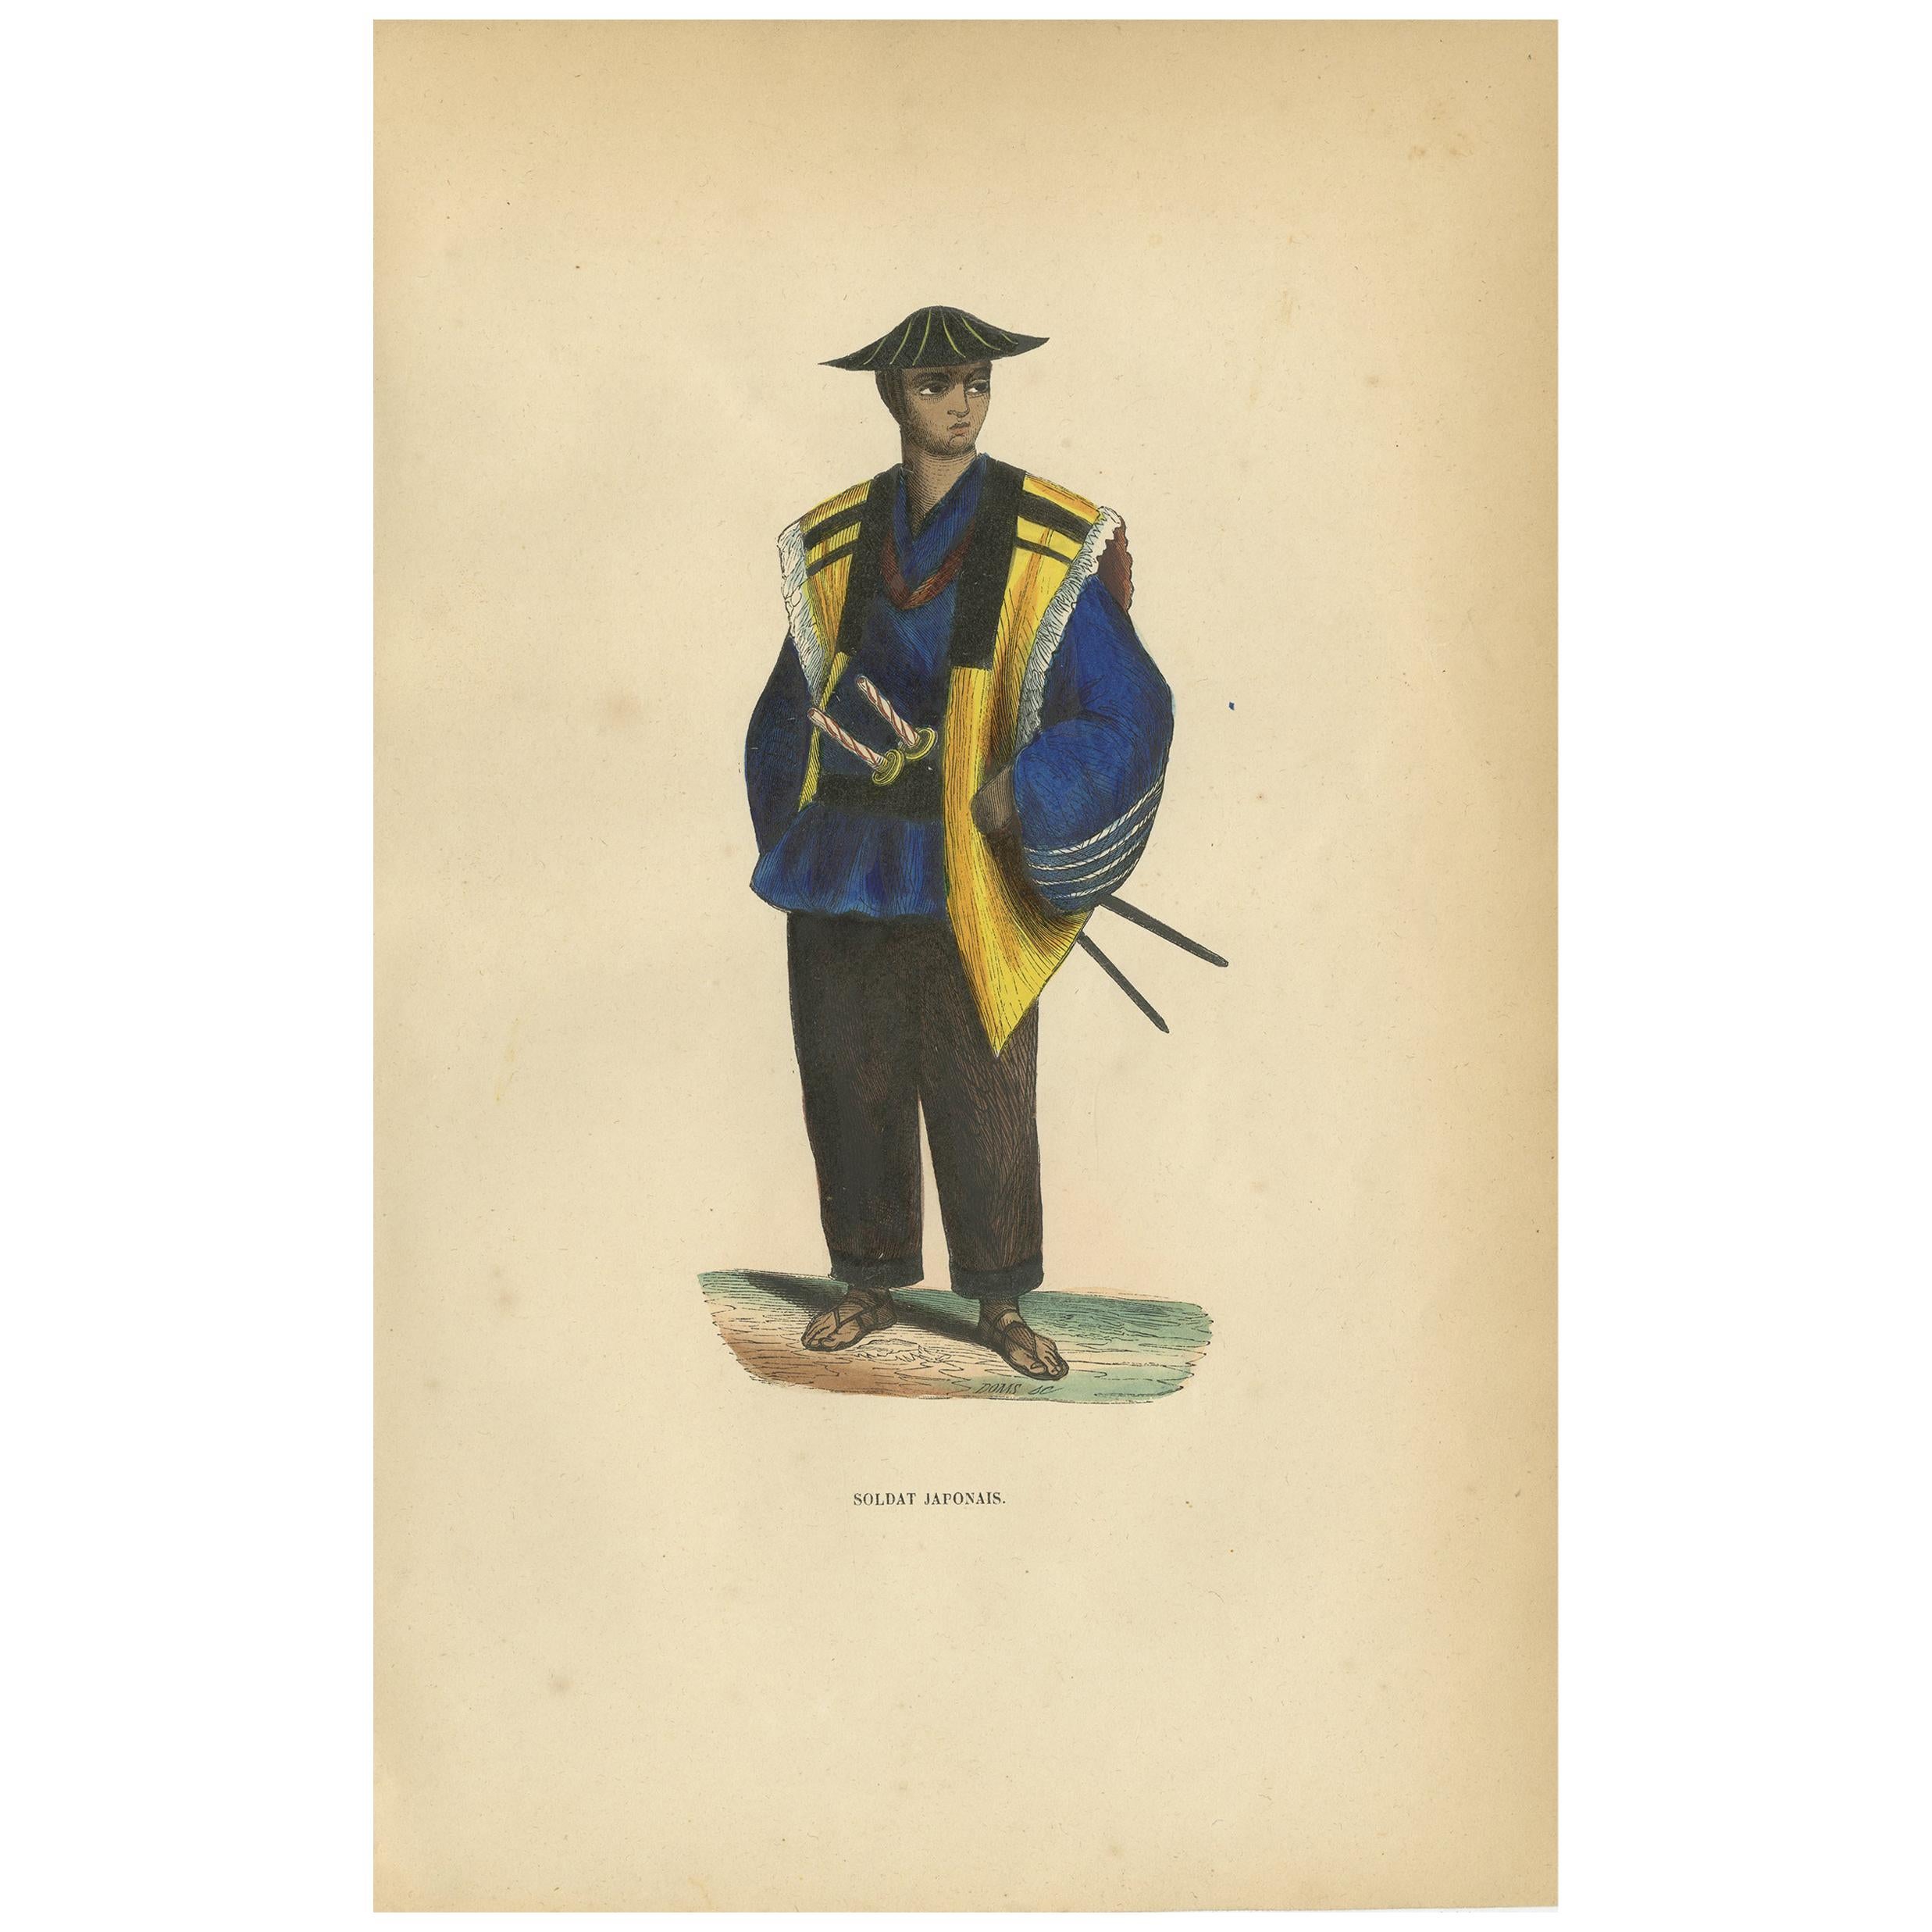 Antique Print of a Japanese Soldier by Wahlen, 1843